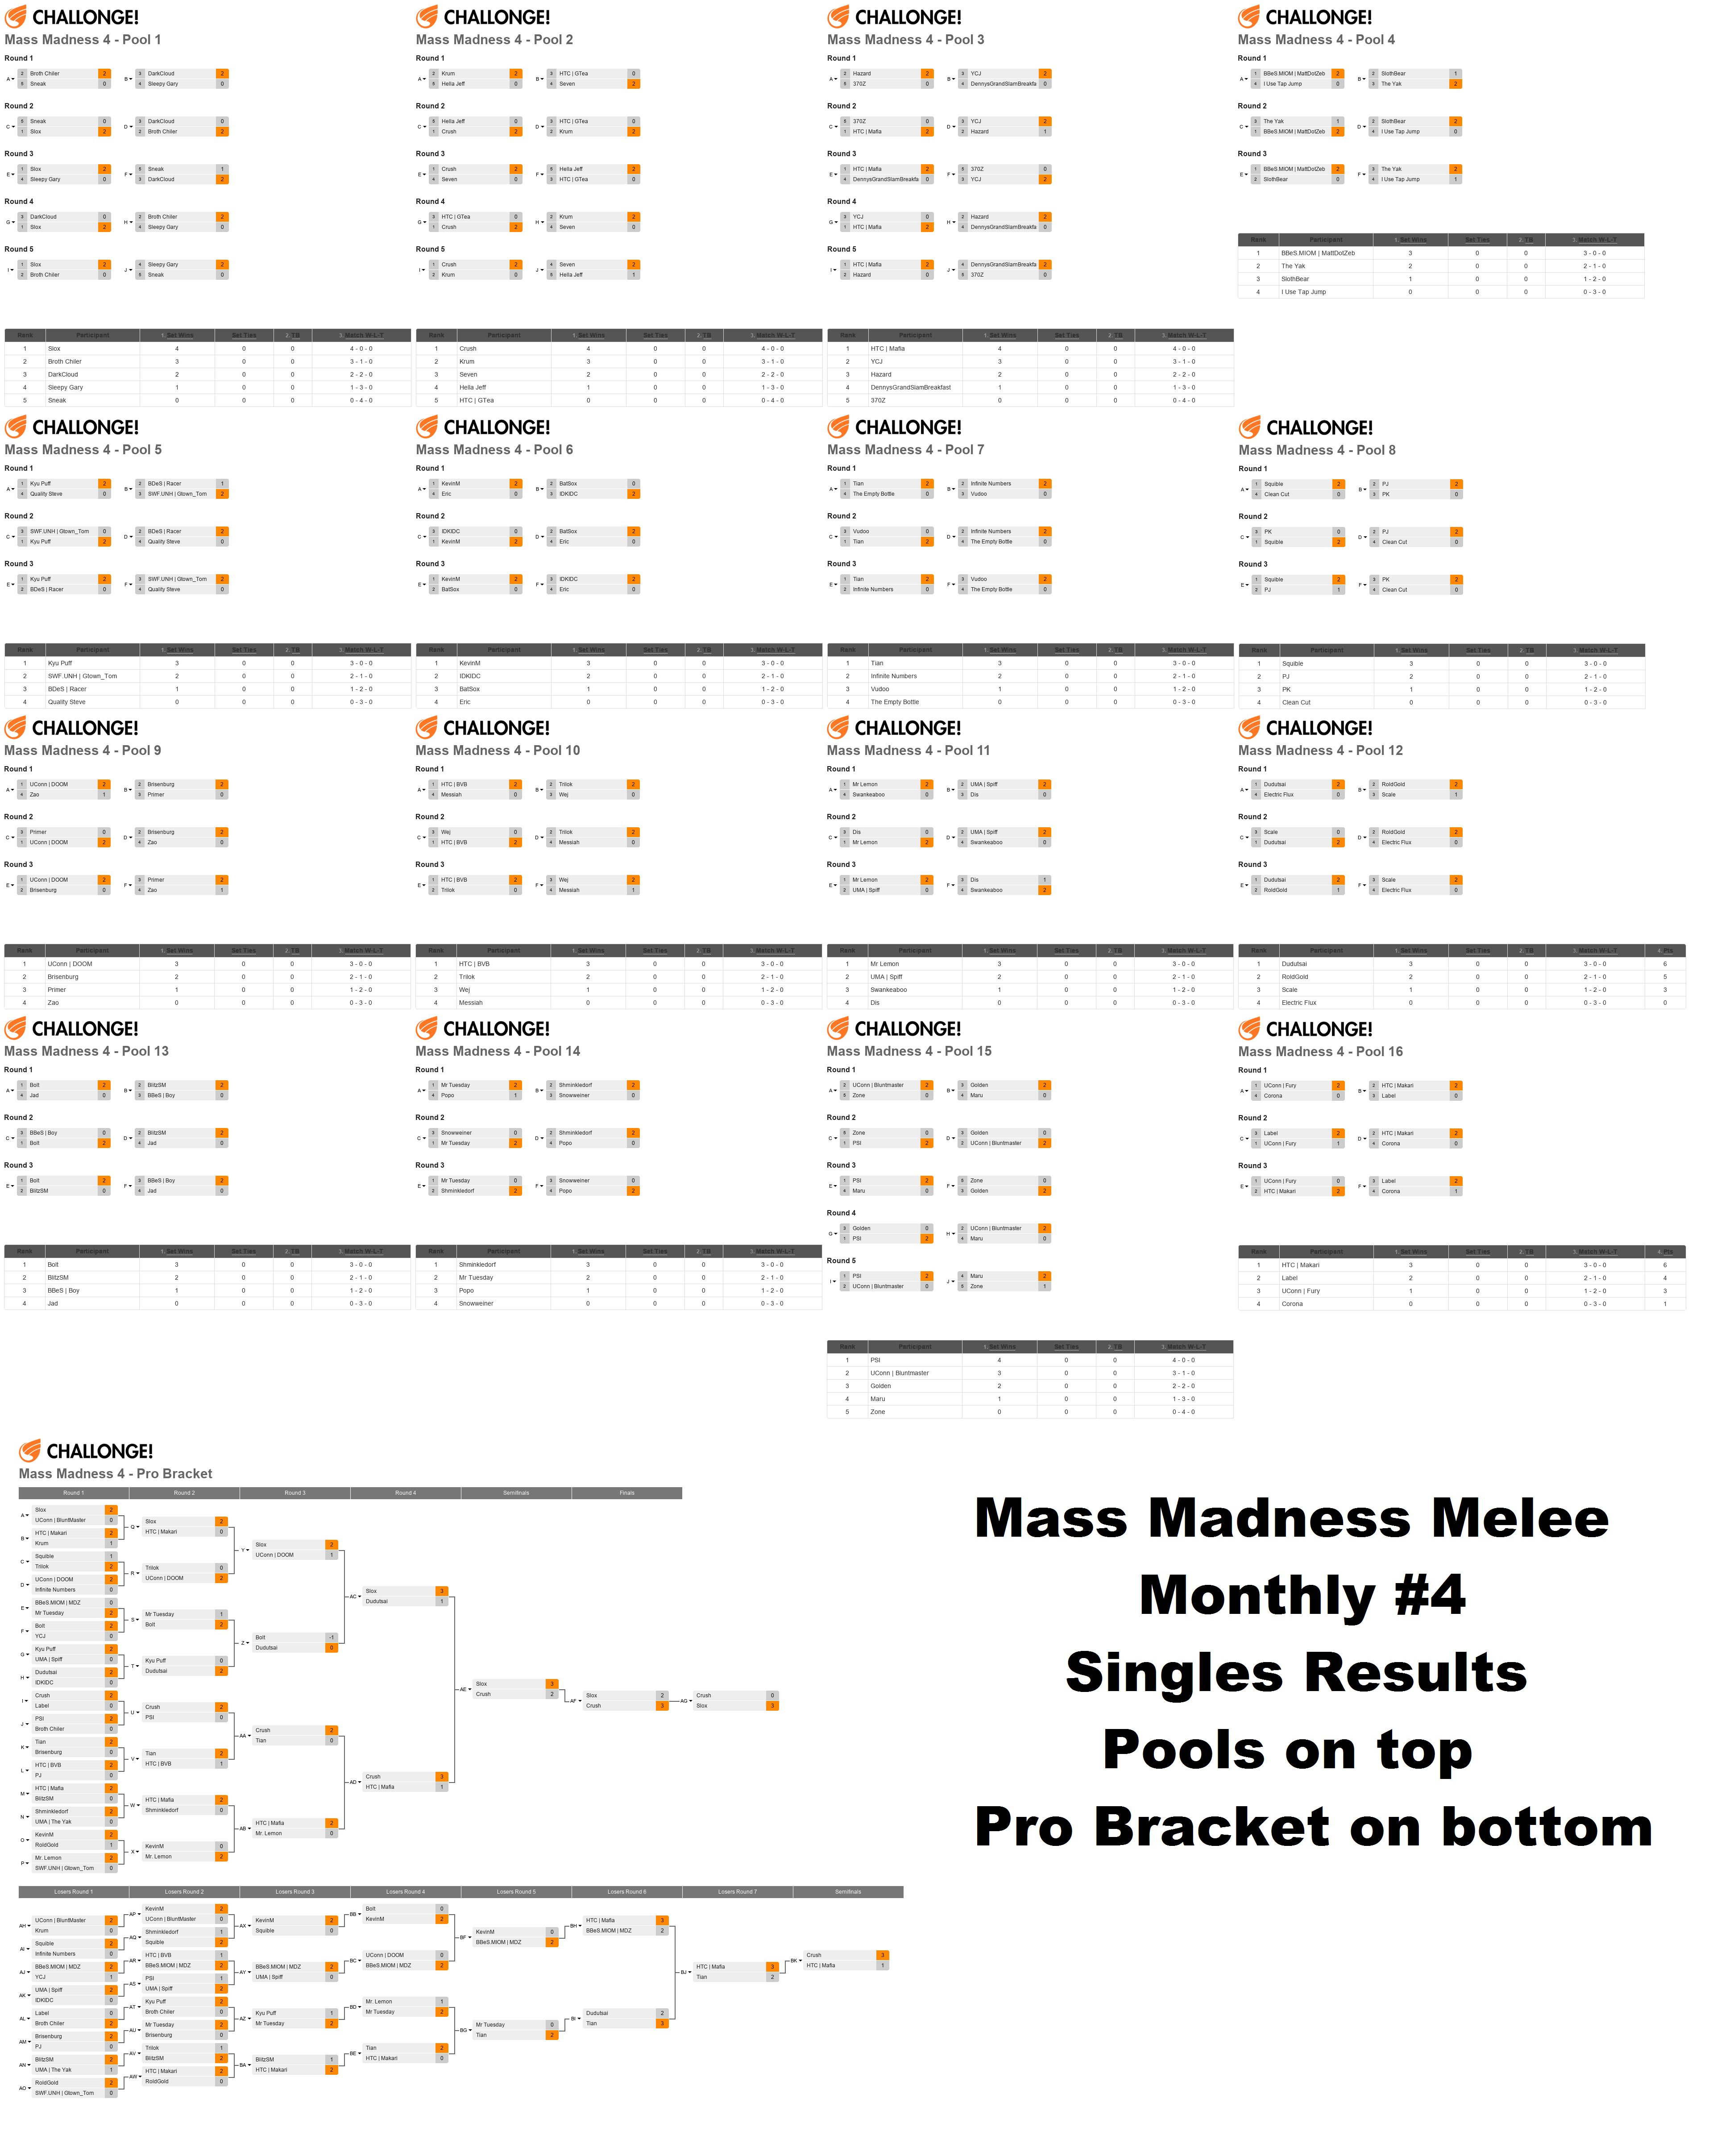 Mass Madness Monthly #4: Melee Singles